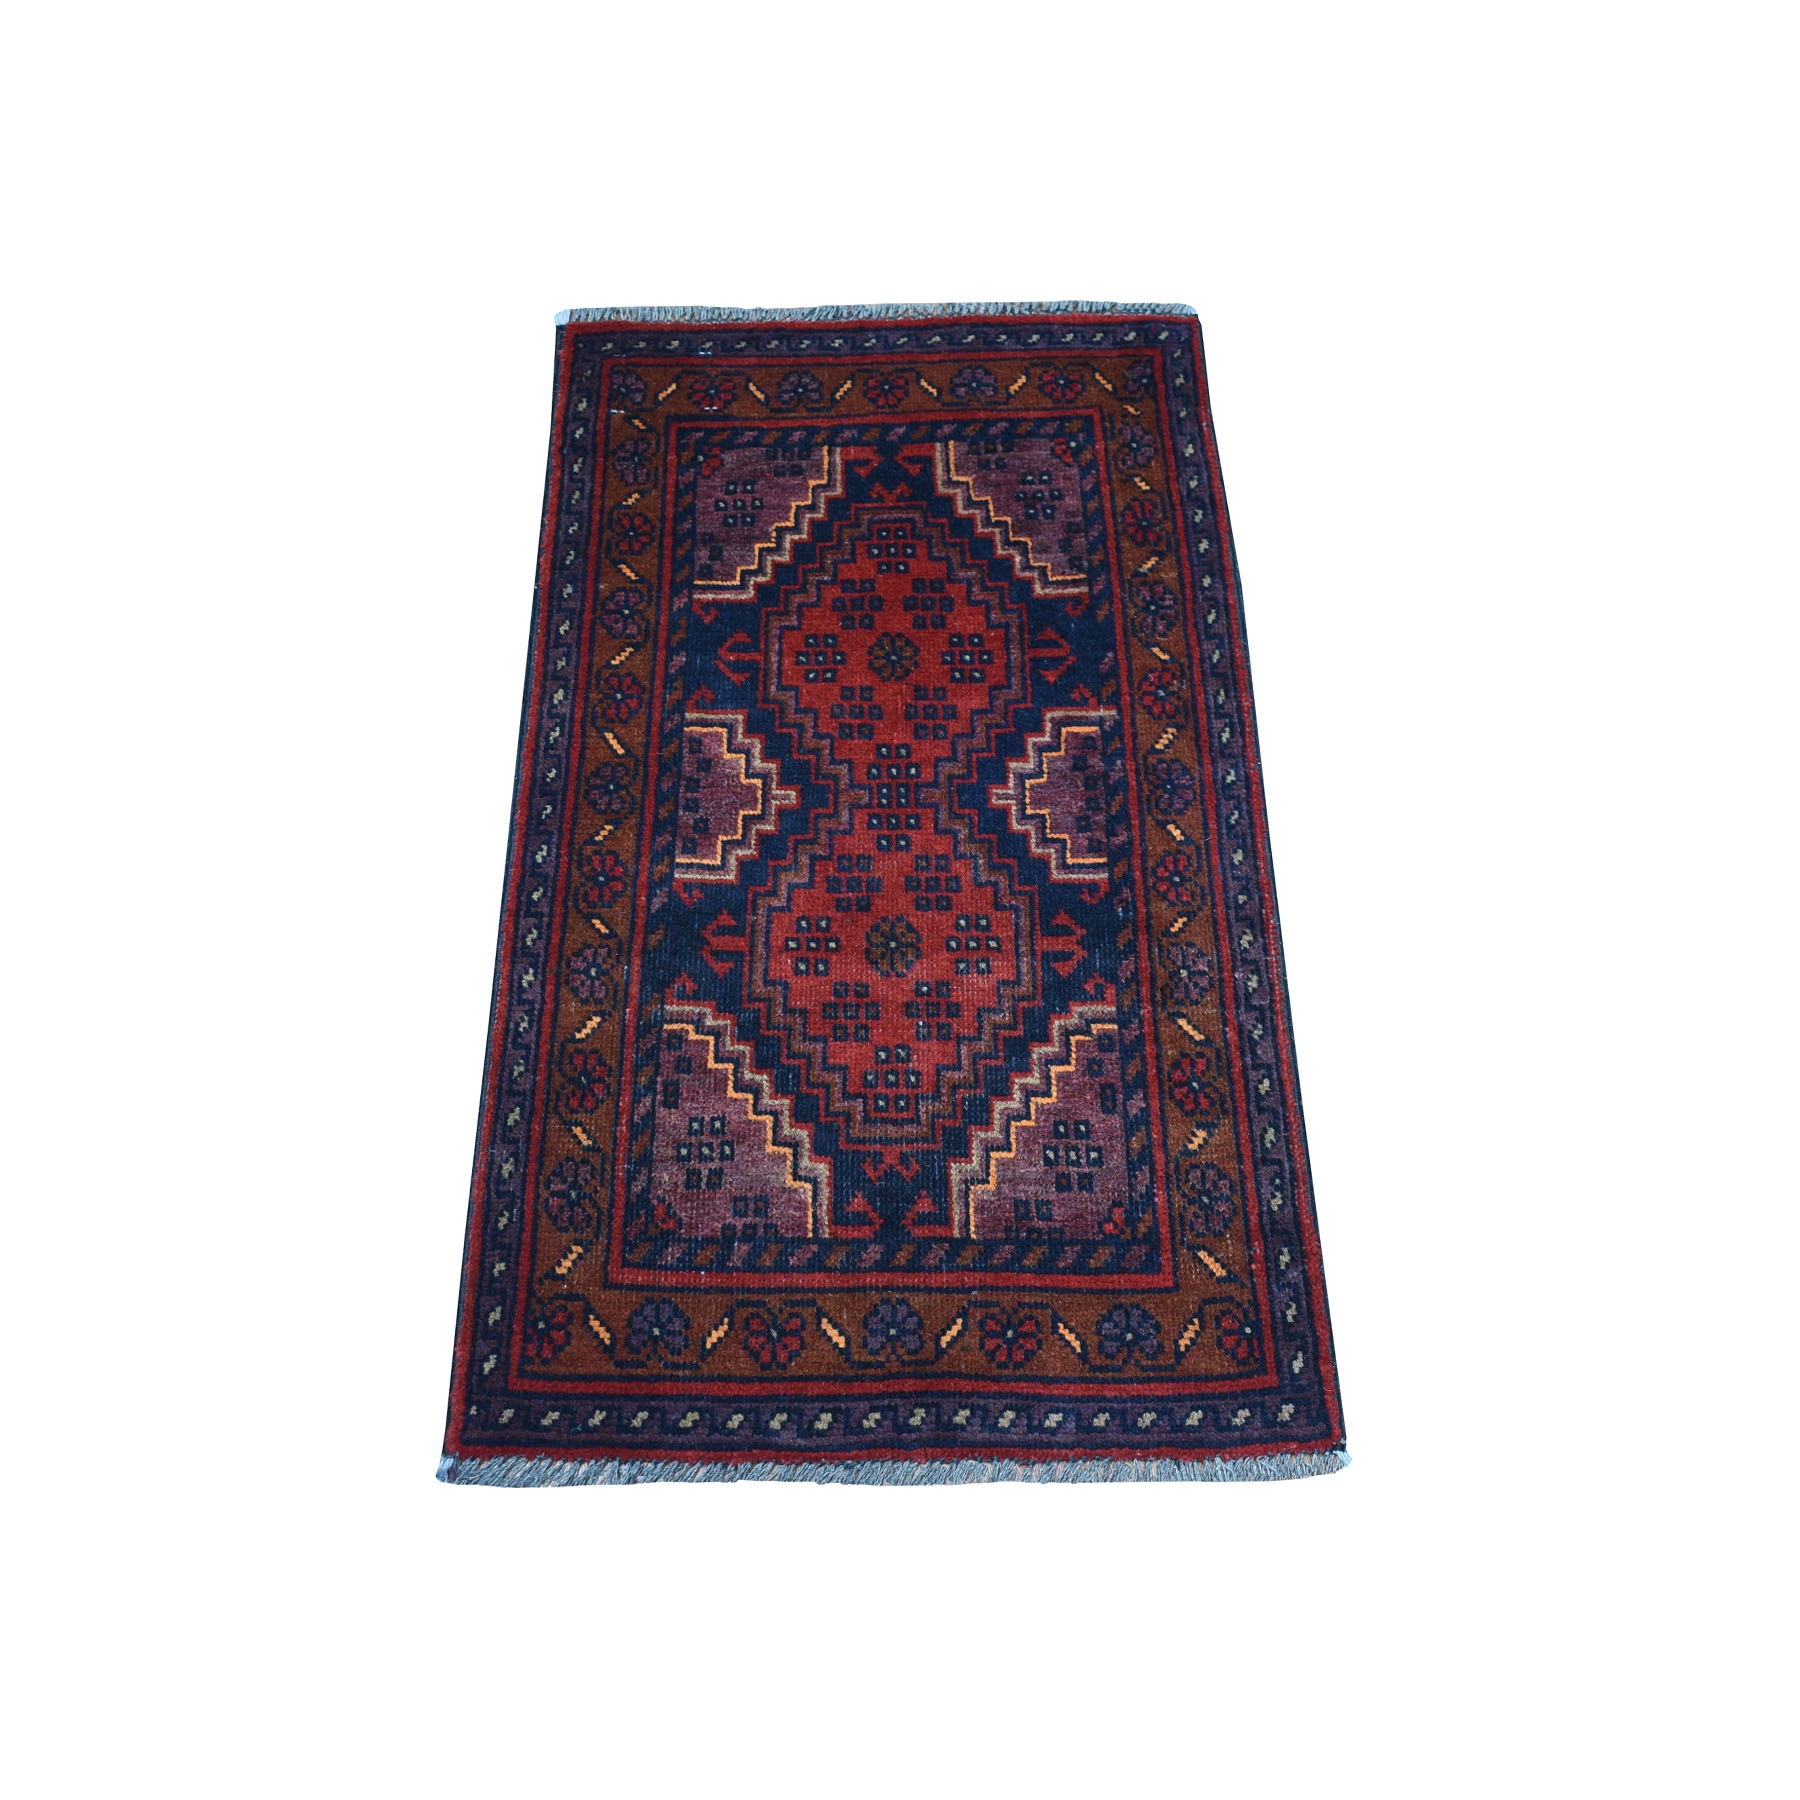 1'8"X3'2" Deep And Saturated Red Geometric Afghan Andkhoy Pure Wool Hand Knotted Oriental Rug moaec7cd